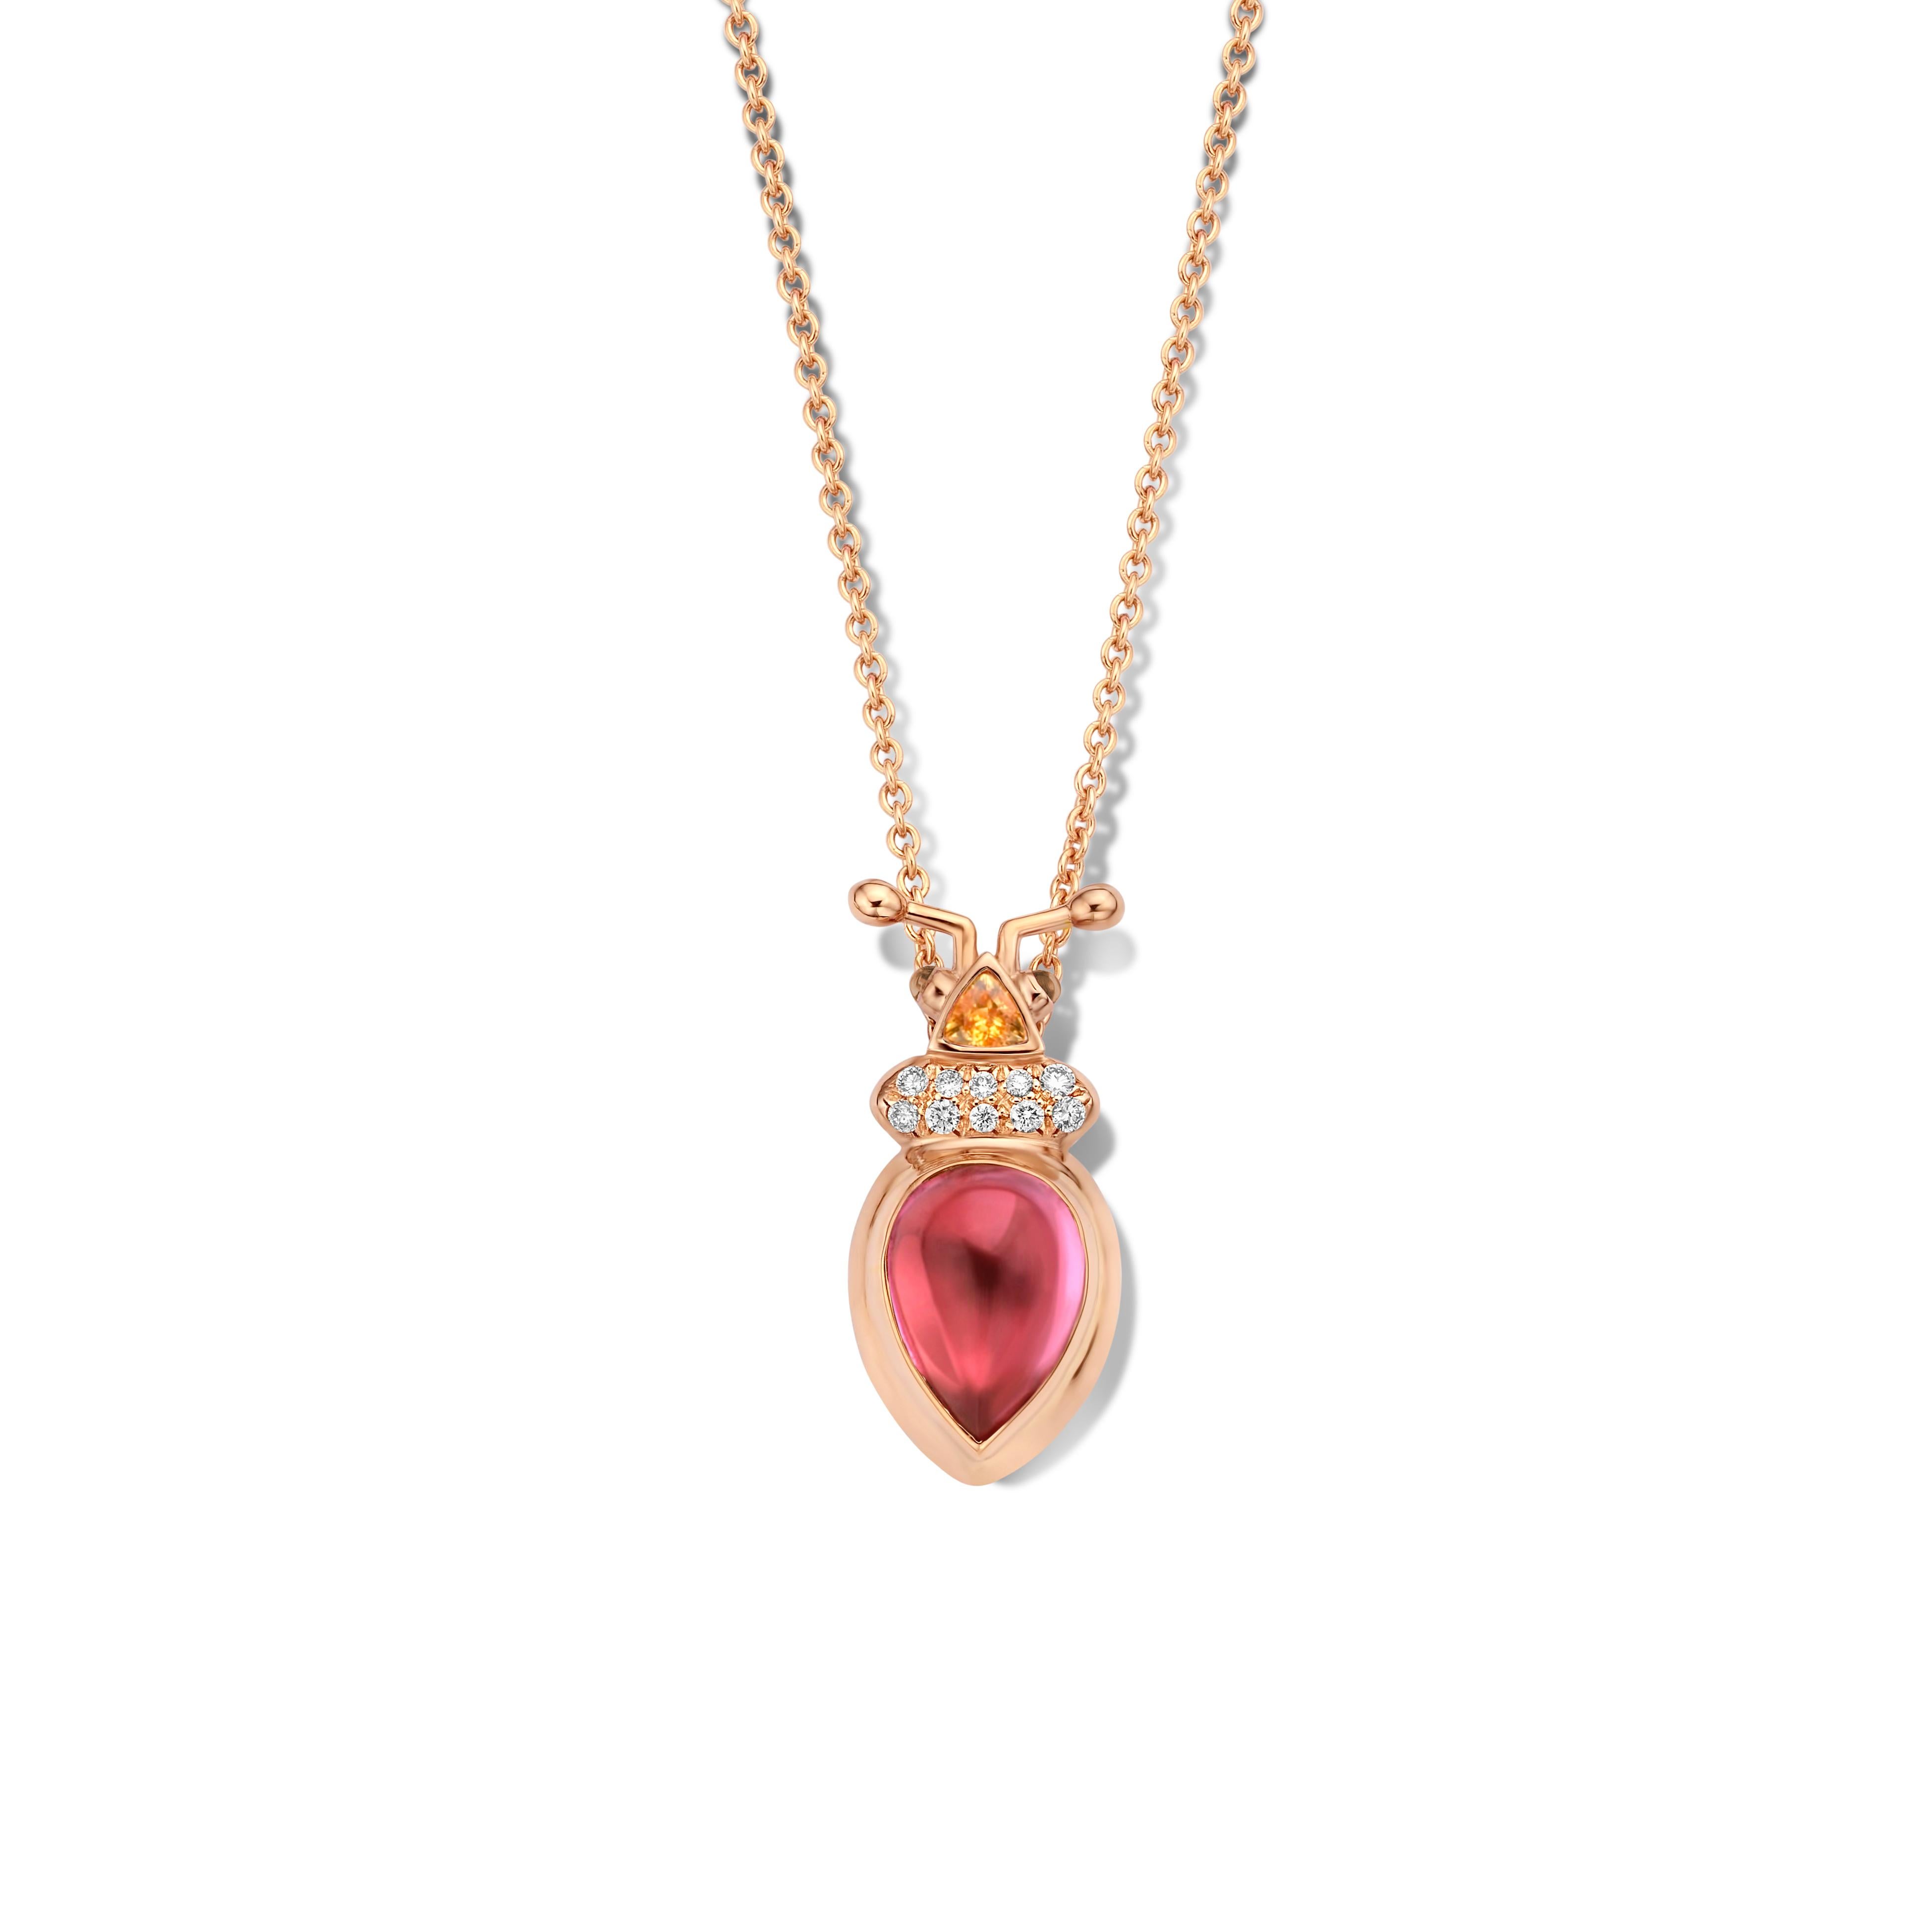 One of a kind lucky beetle necklace in 18K rose gold 10g set with the finest diamonds in brilliant cut 0,09Ct (VVS/DEF quality) and one natural, pink tourmaline in pear cabouchon cut 2,00Ct. The head is set with a mandarin garnet in trillion cut and